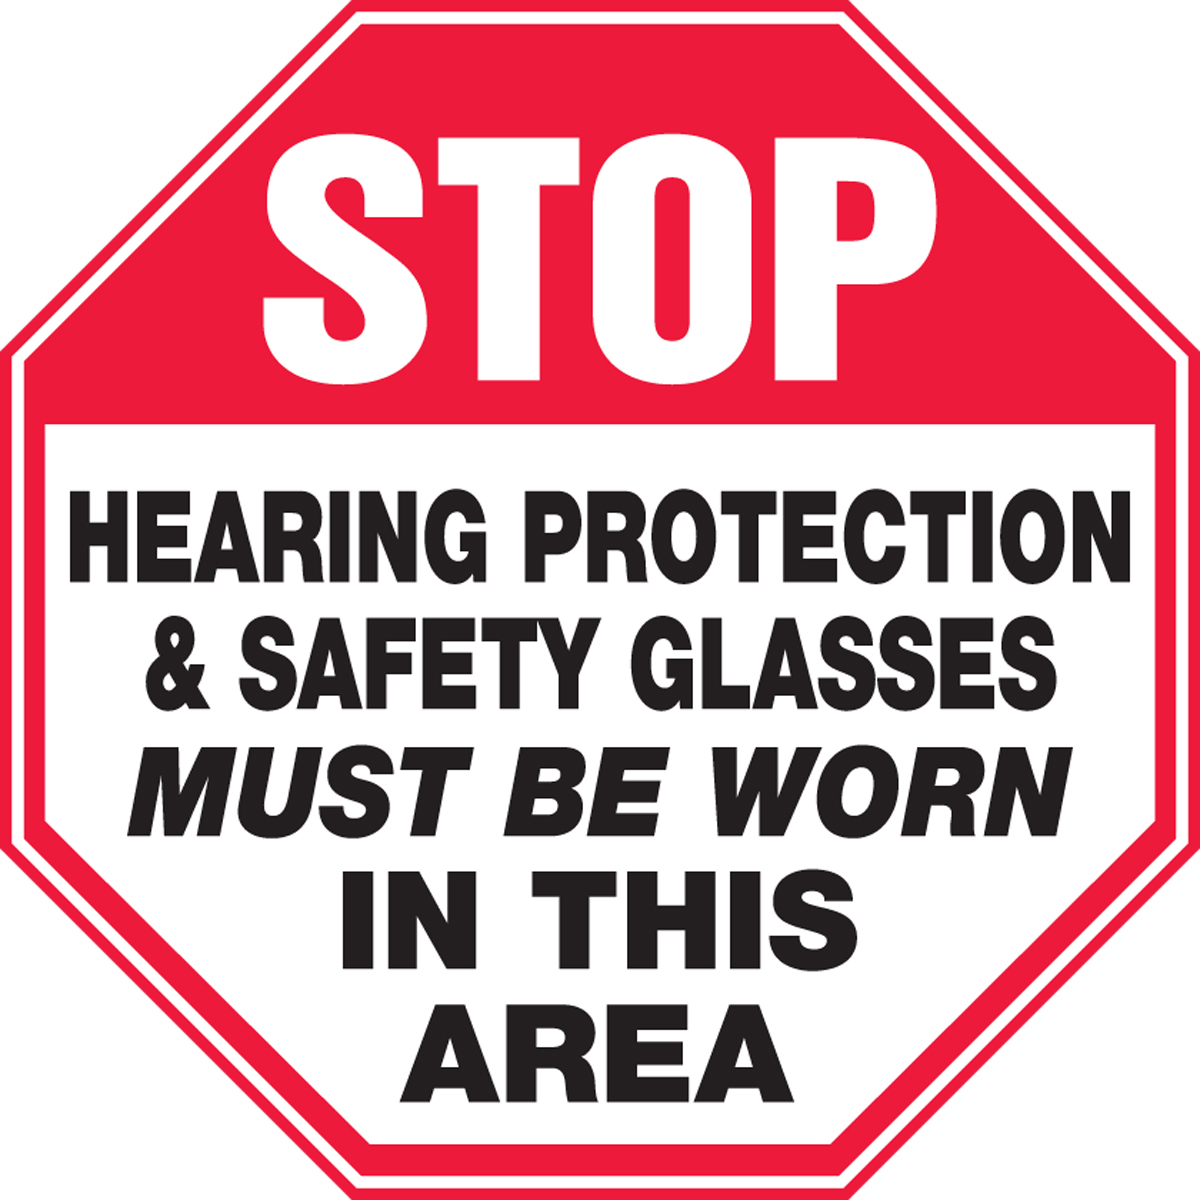 STOP HEARING PROTECTION AND SAFETY GLASSES MUST BE WORN IN THIS AREA